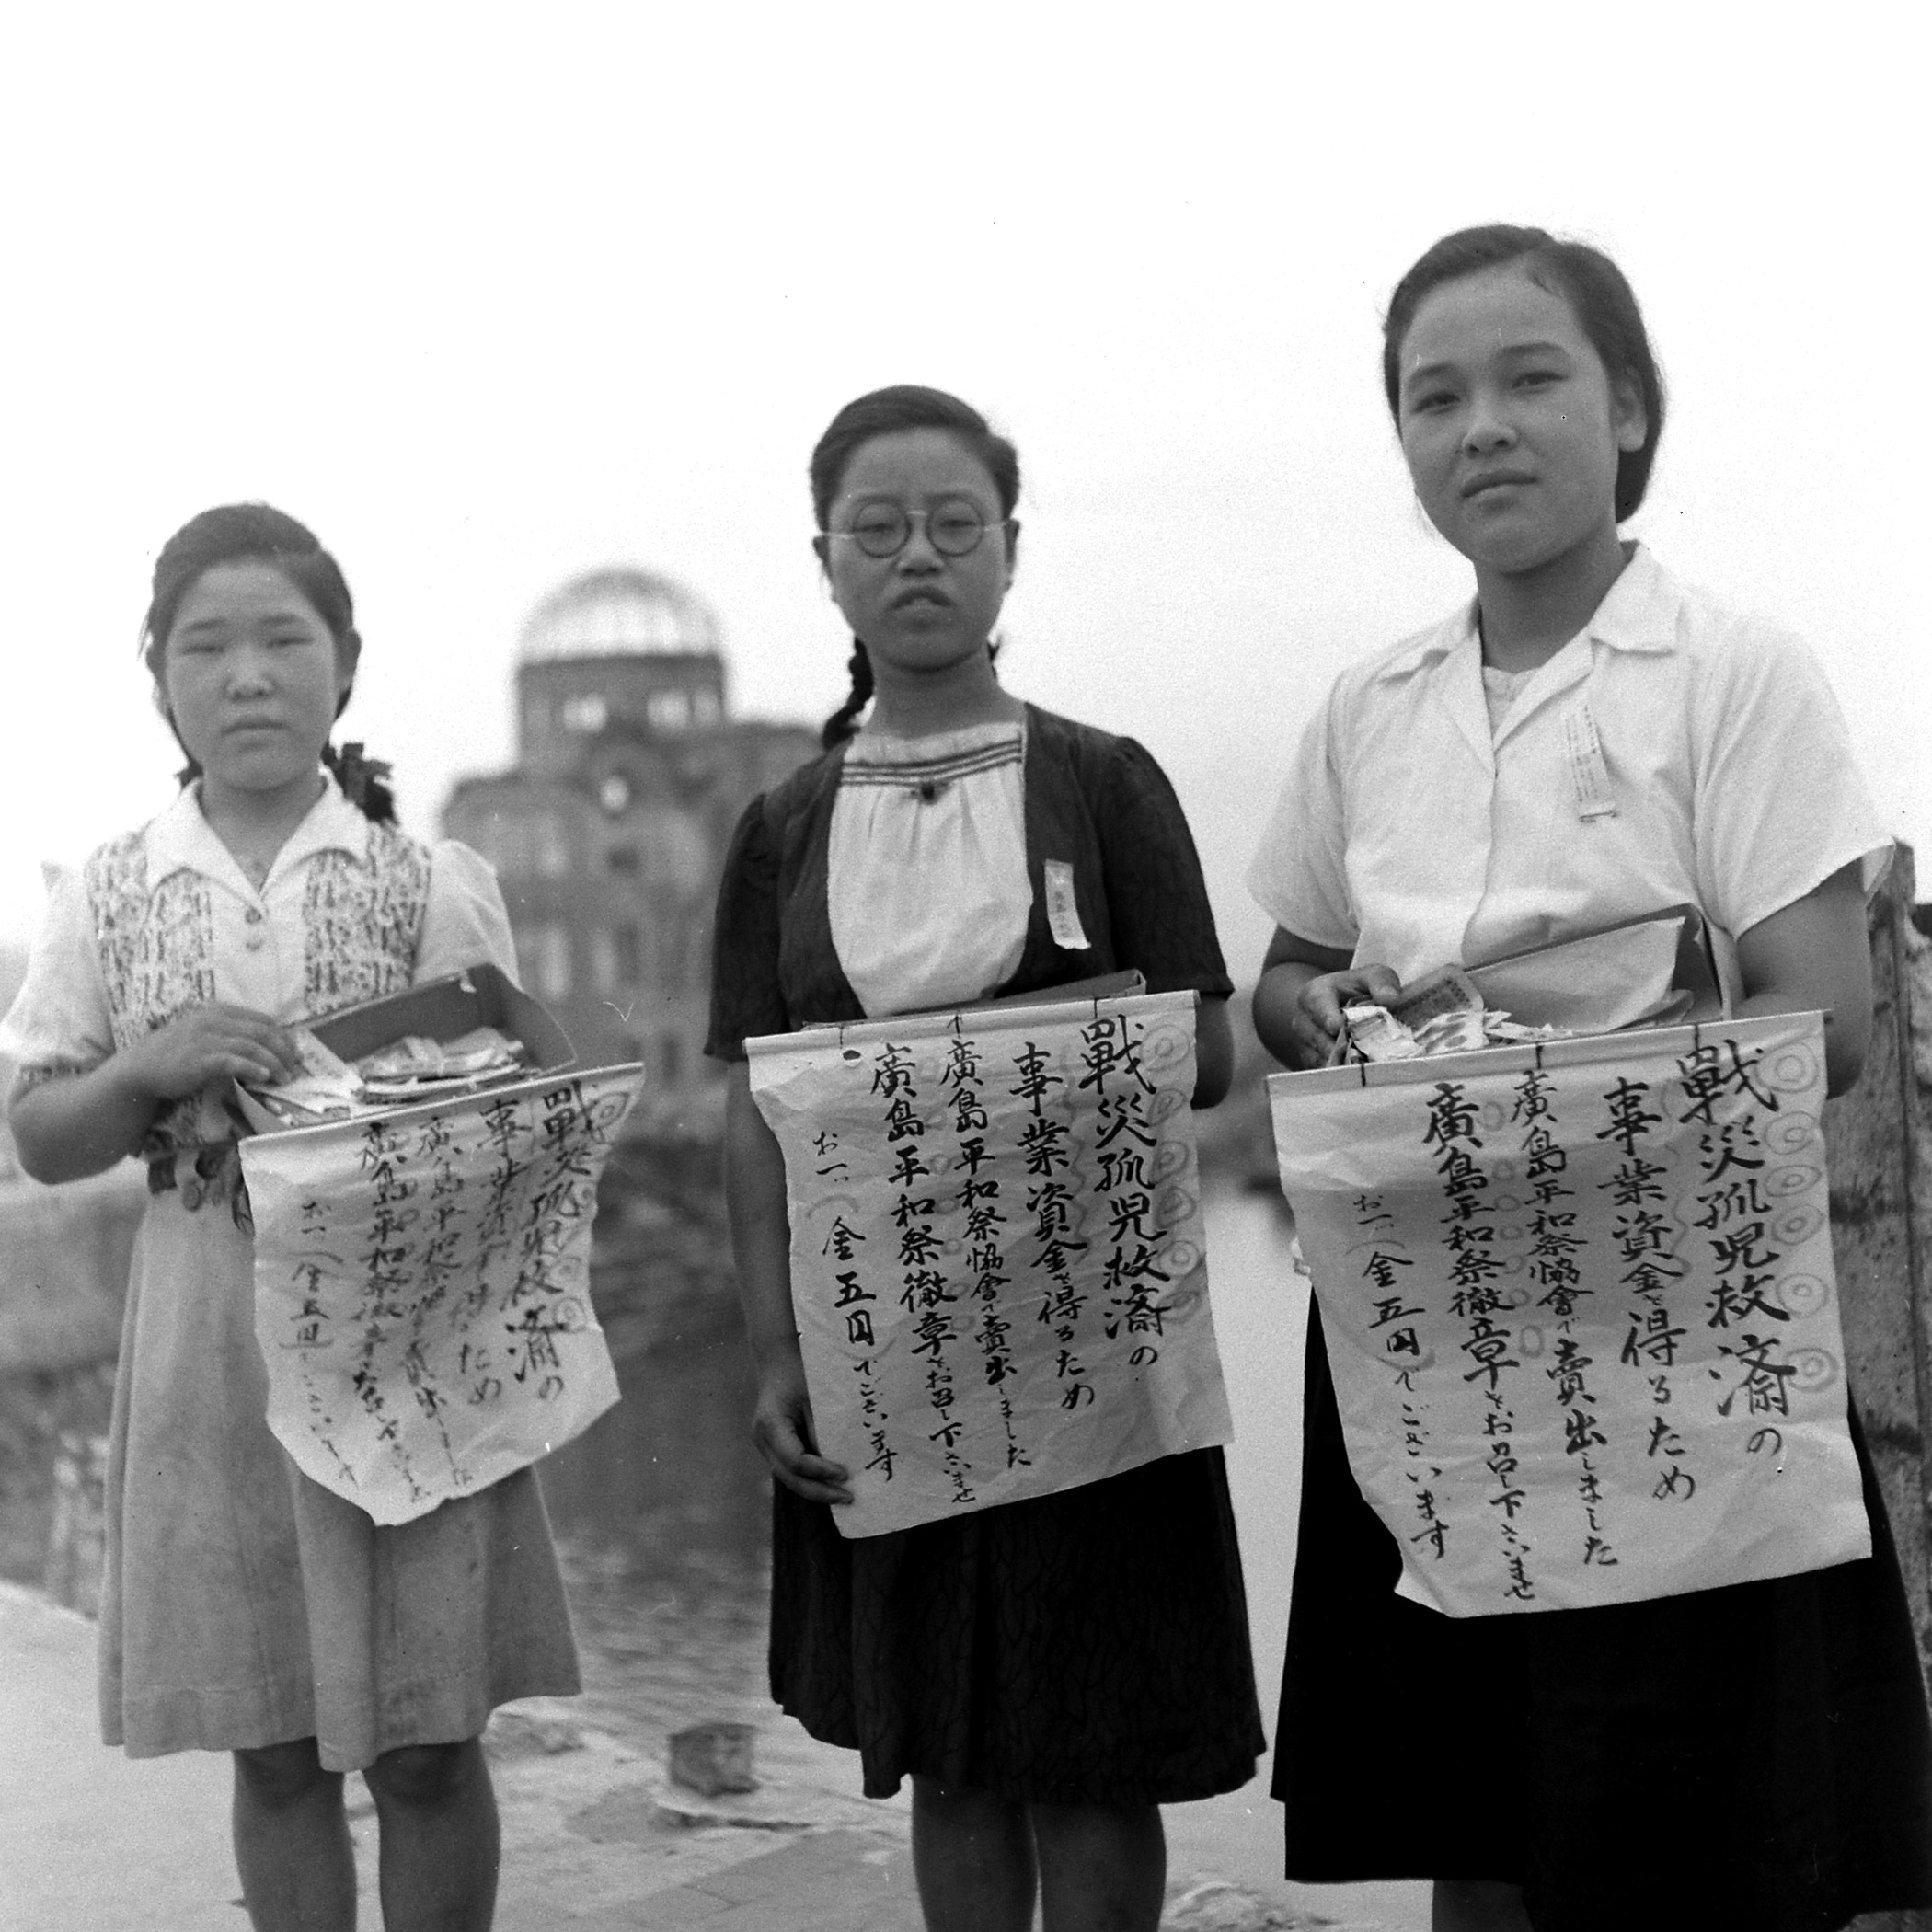 Girls selling peace ribbons during anniversary of bomb dropping in Hiroshima.